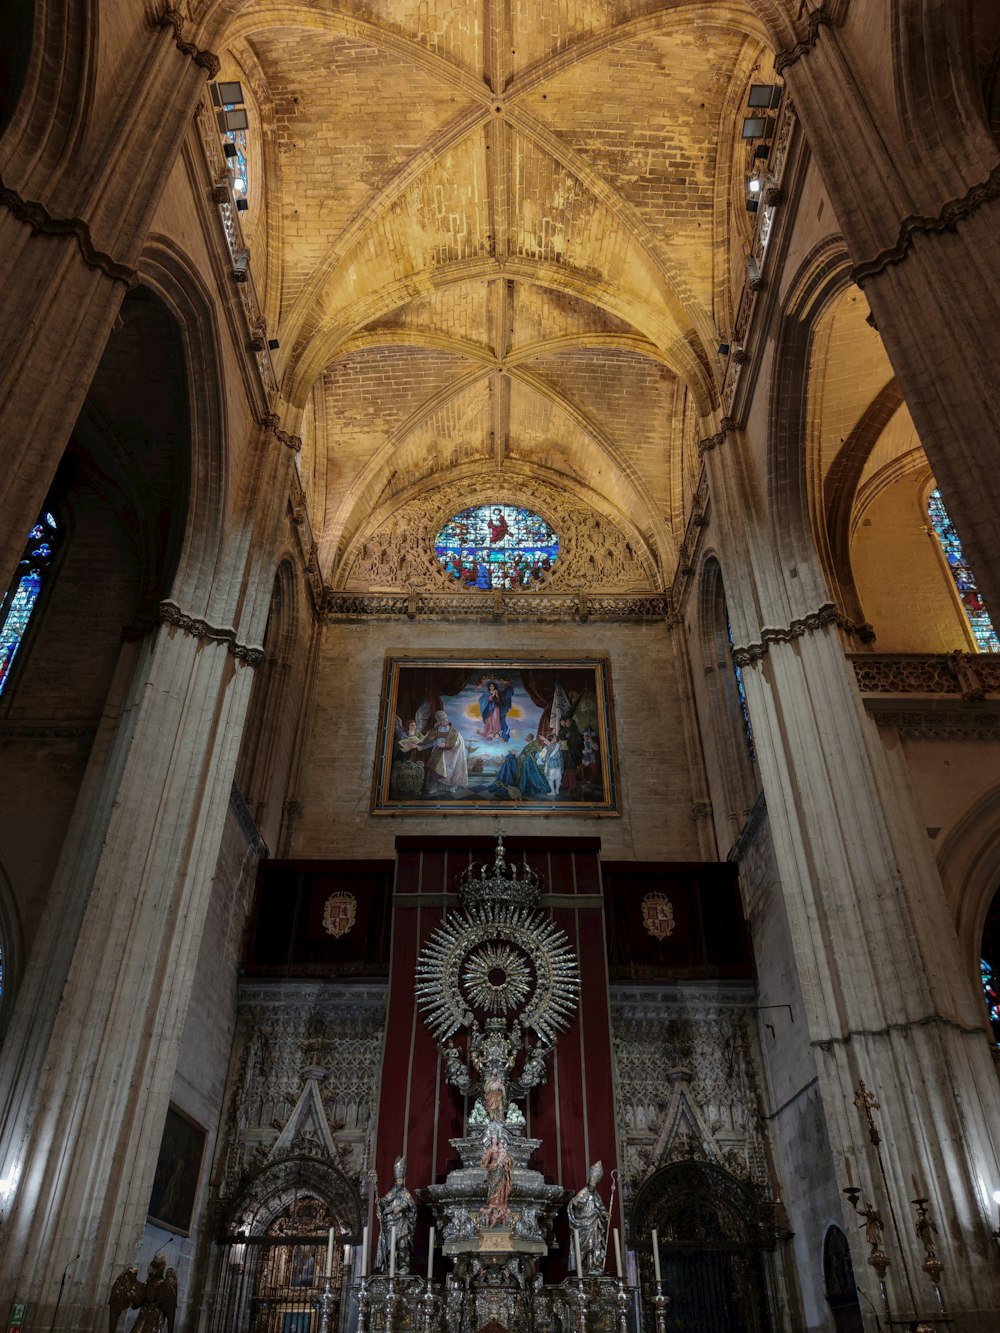 a large cathedral with a high vaulted ceiling and stained glass windows